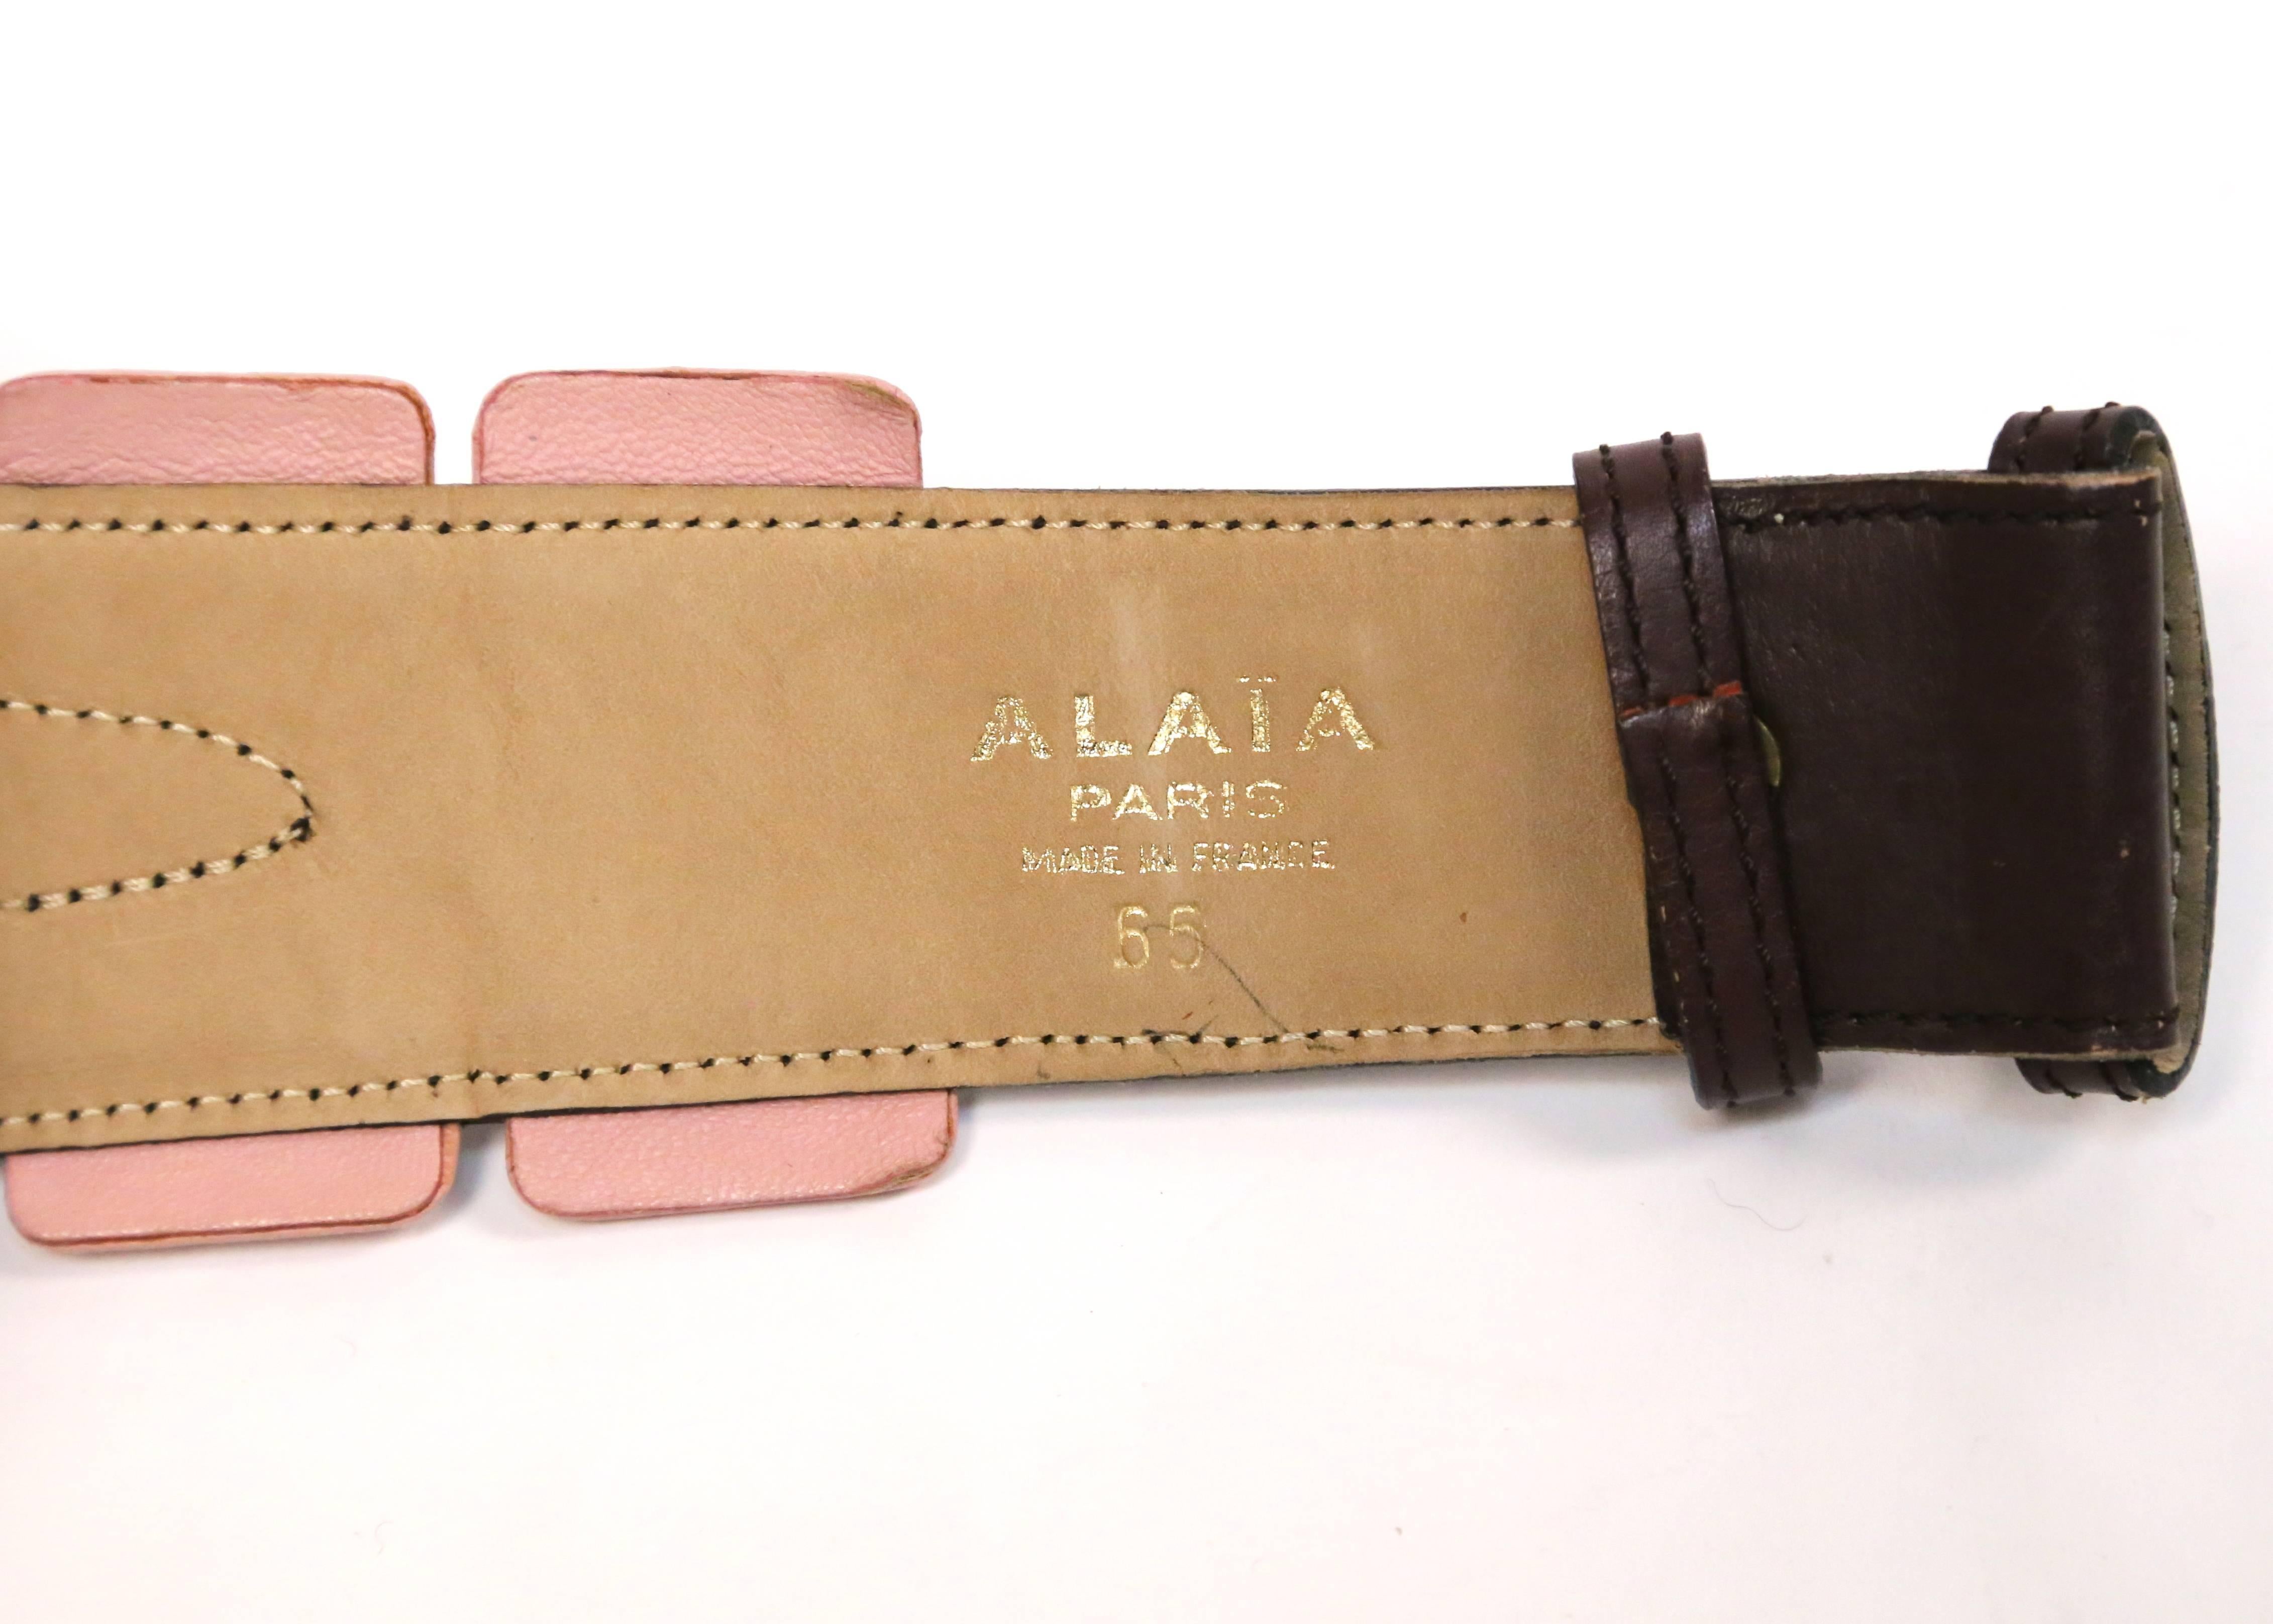 Women's 1990's AZZEDINE ALAIA burgundy and pink leather belt with silver pyramid studs